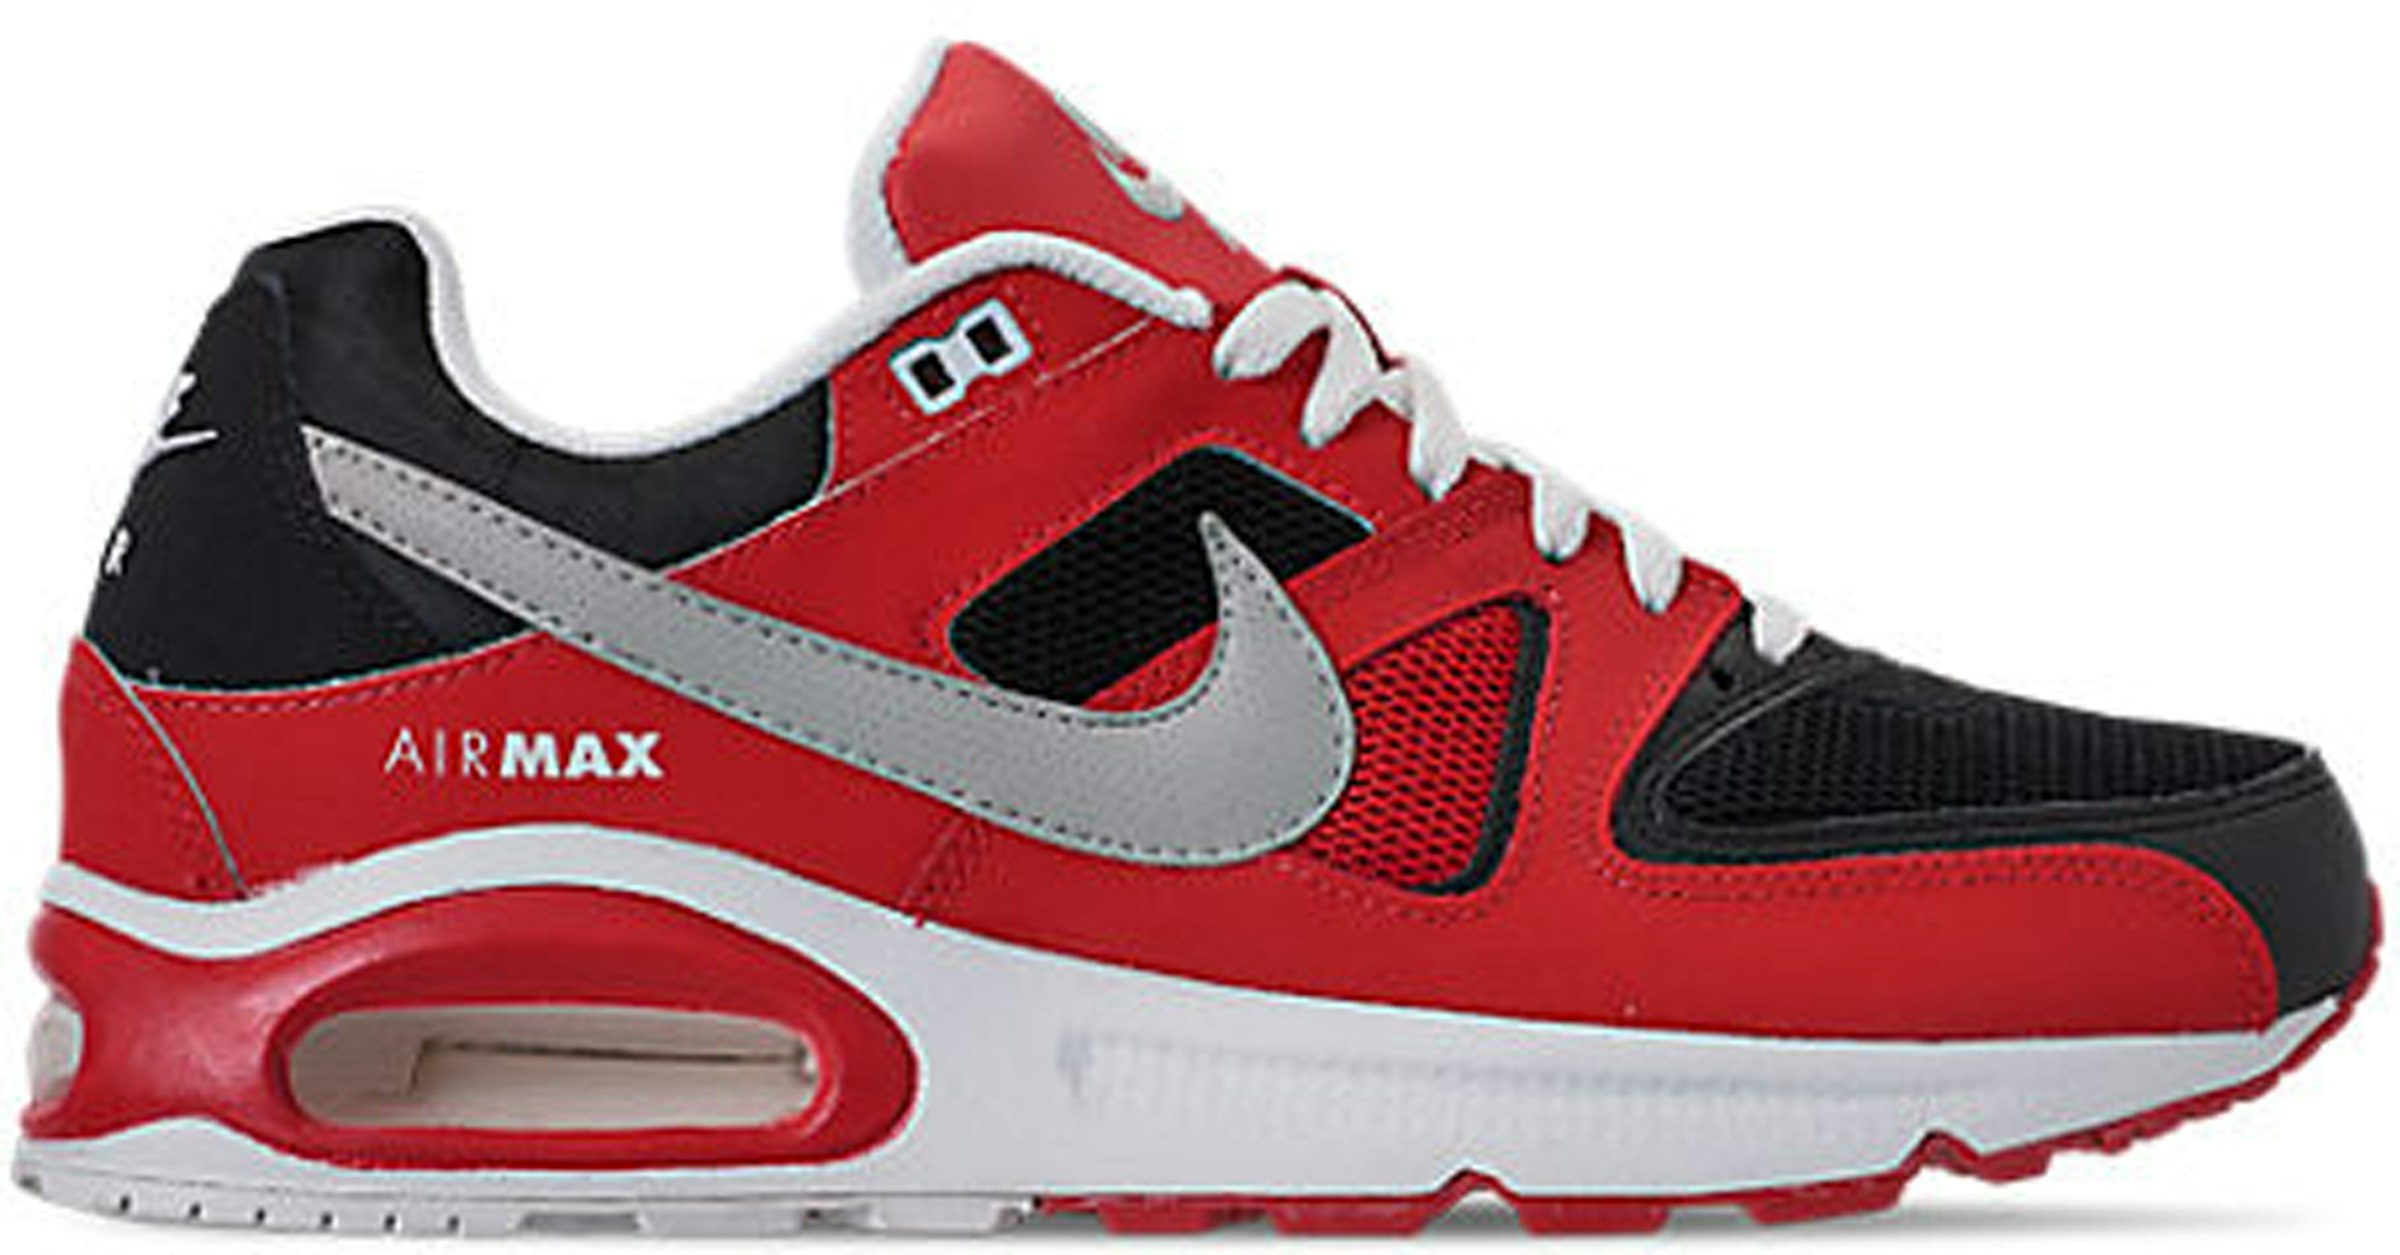 Nike Air Max Command Black Silver Red - 629993-039 - US